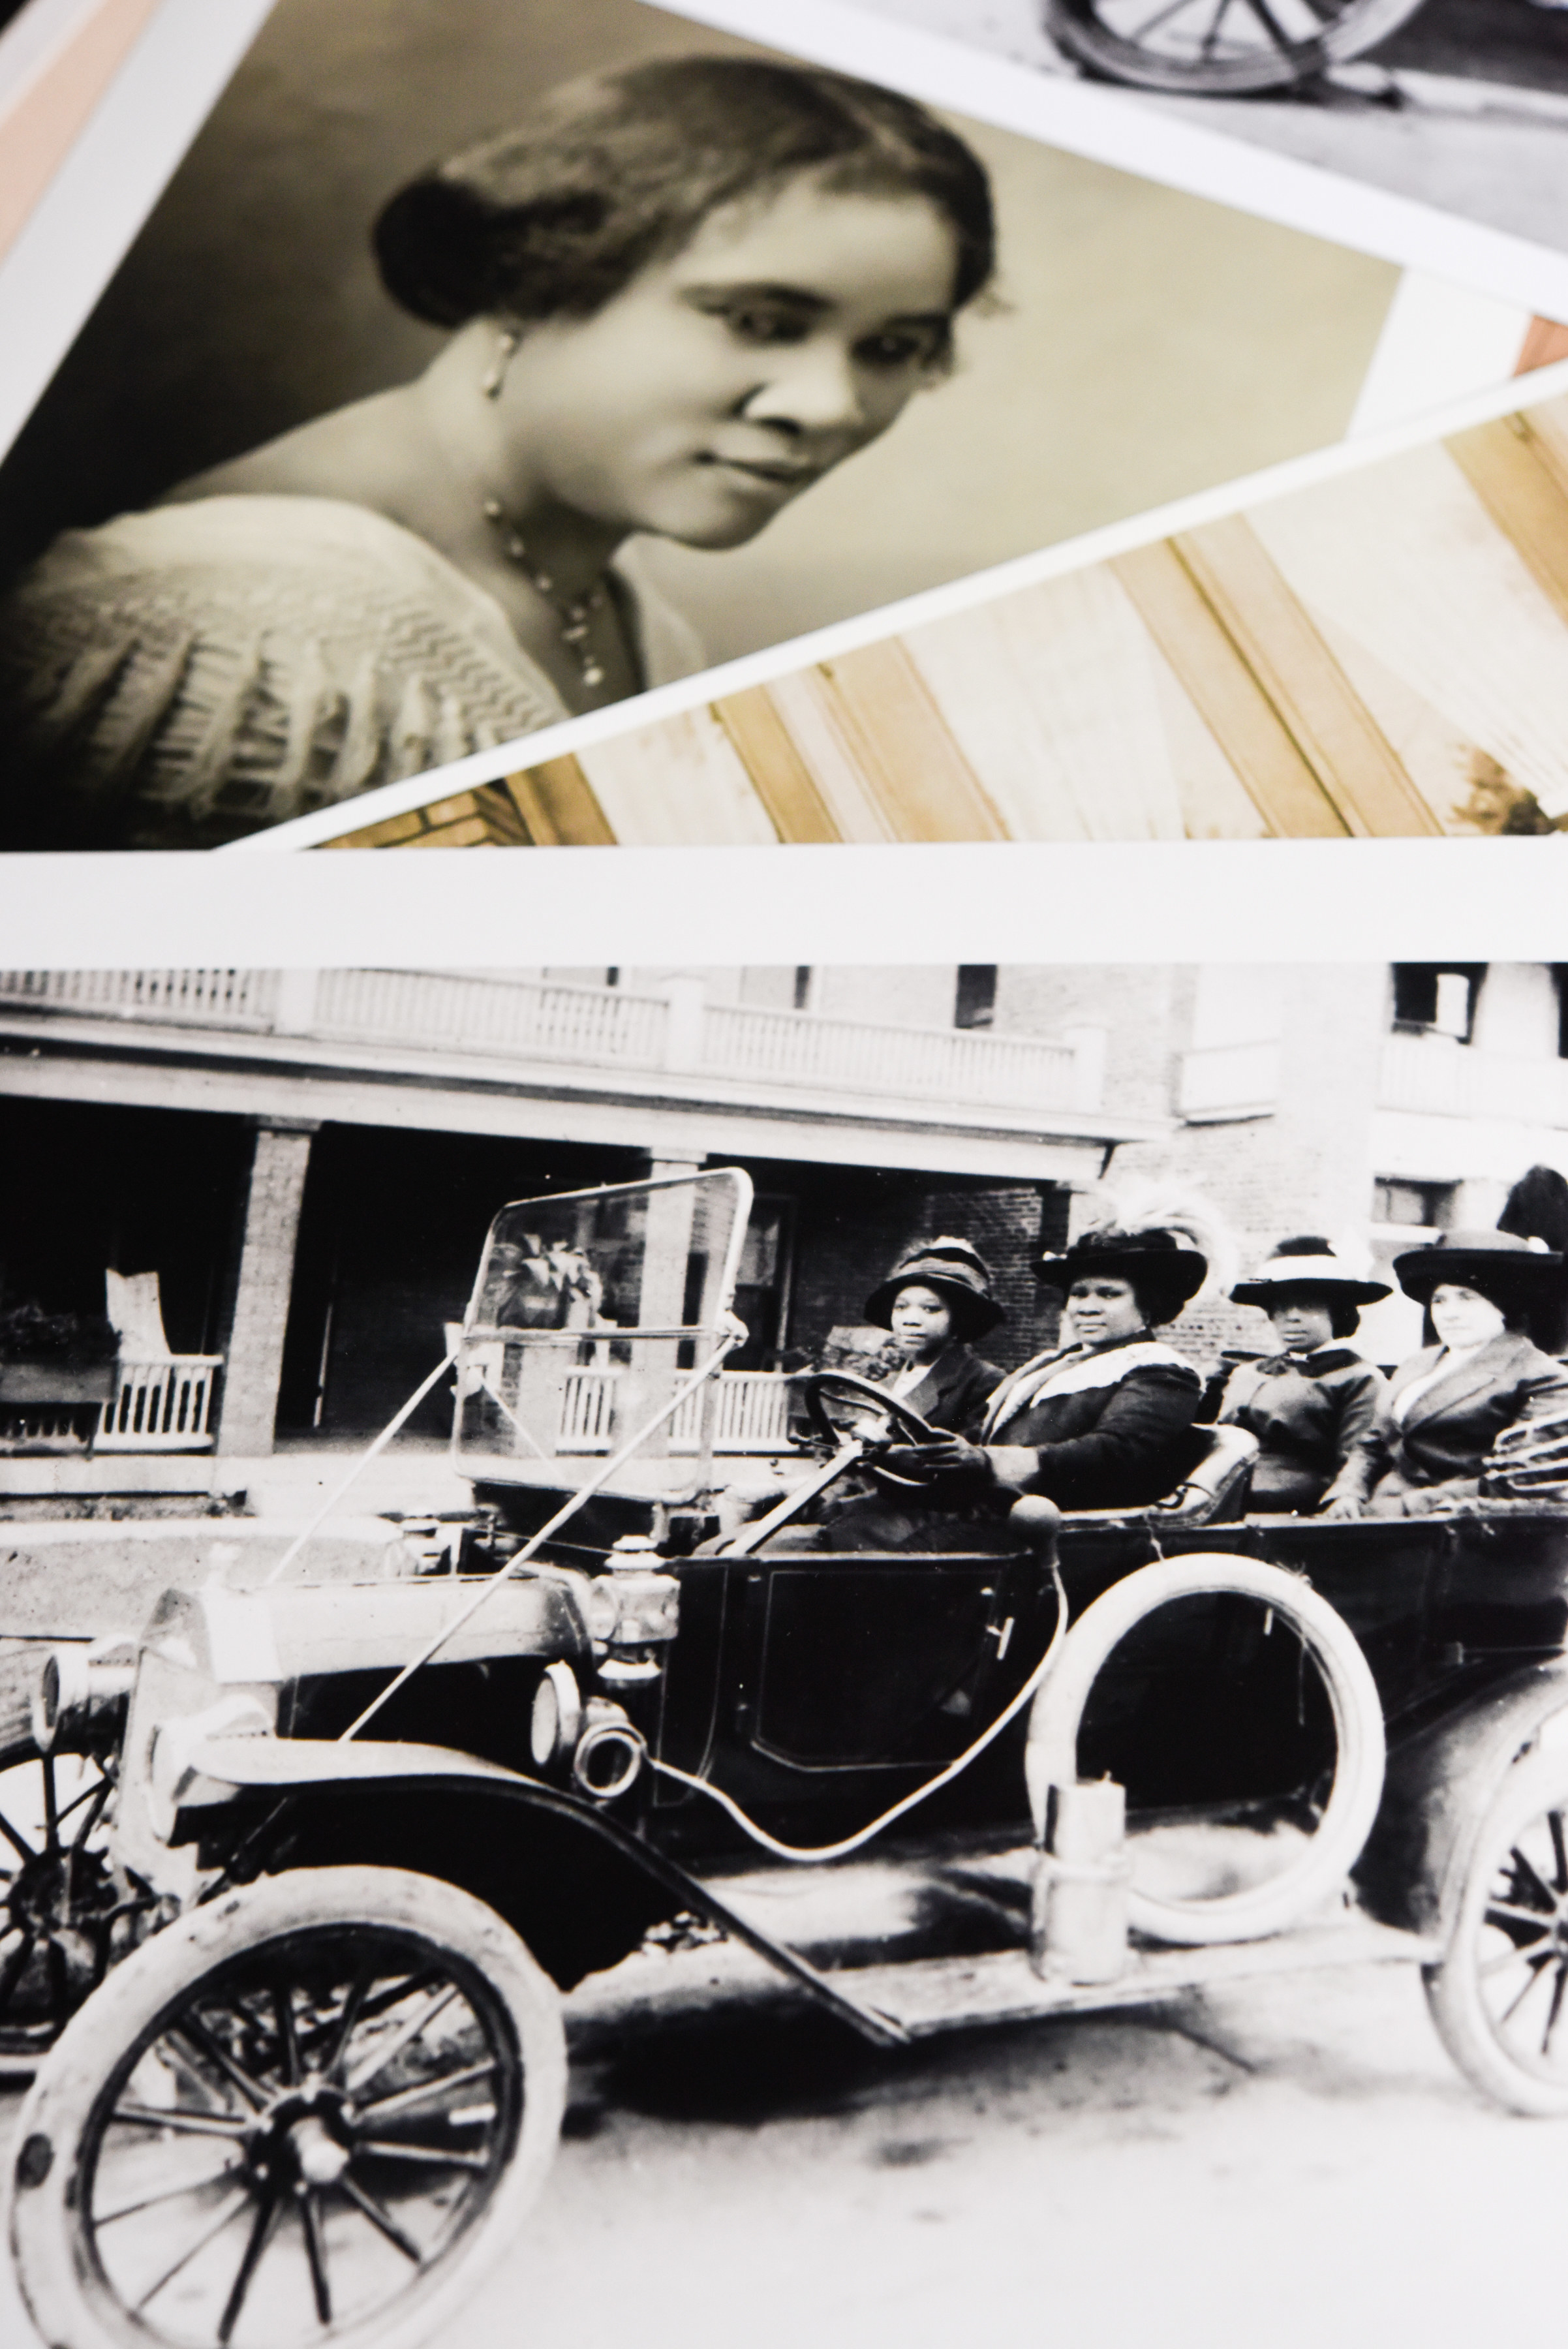 On the bottom is a picture of Madam C.J. Walker driving a car outside of her Indianapolis home in 1912. On the top is the Iconic photo of her taken in 1913 by Addison Scurlock.